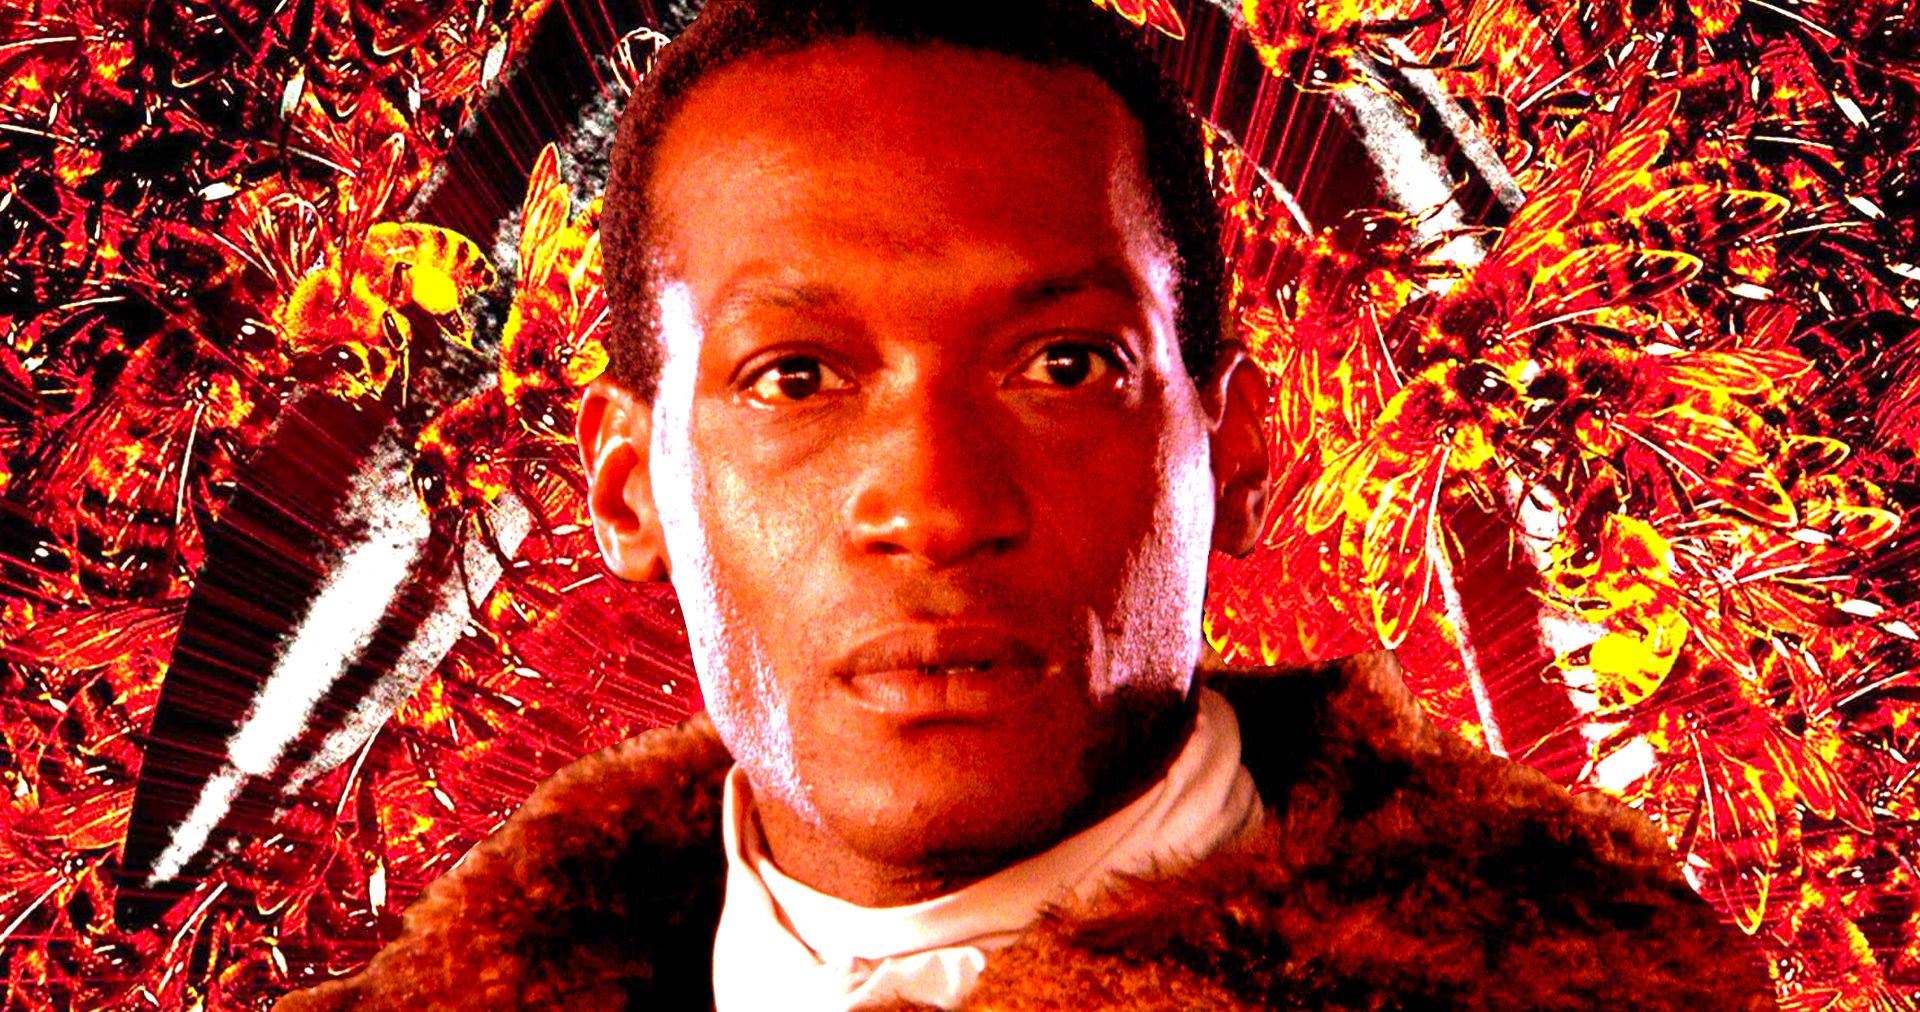 Tony Todd Says the New Candyman Will Be Received Very Well by Horror Fans [Exclusive]